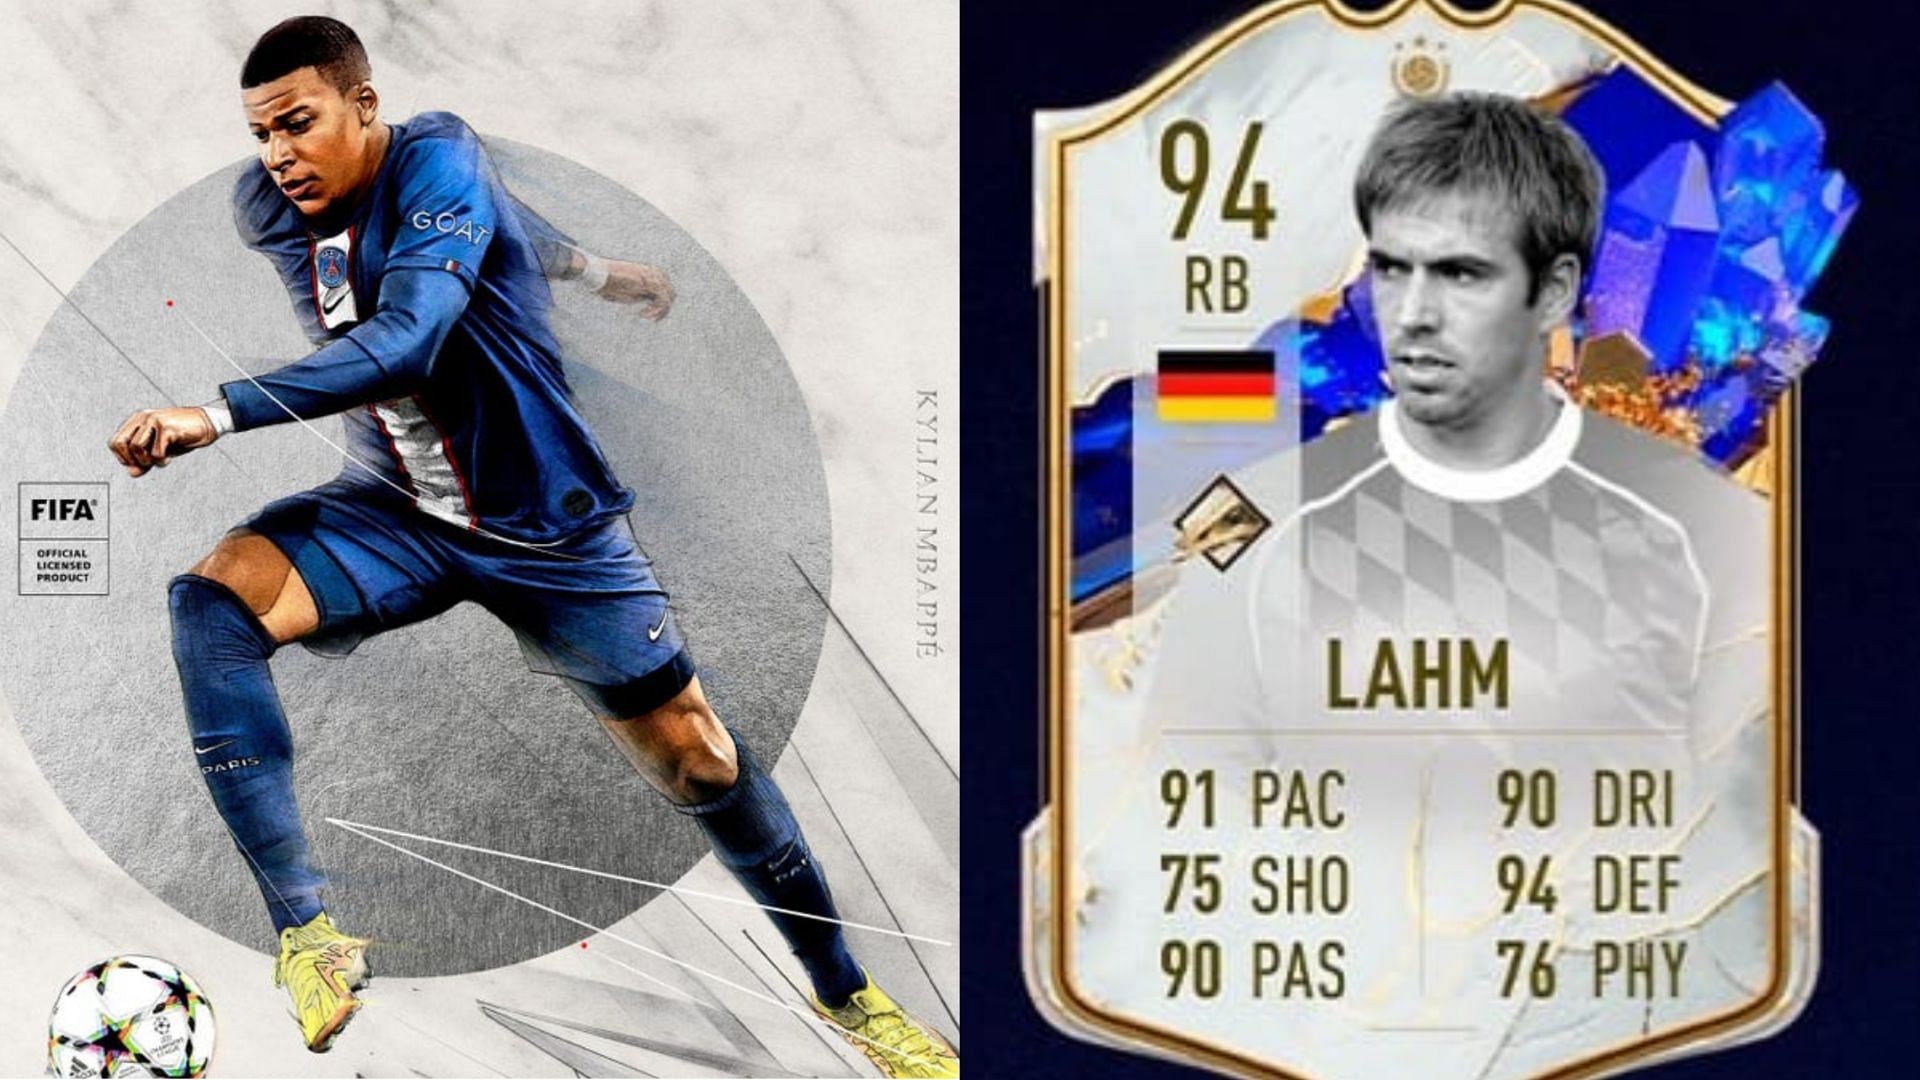 A special version of Philip Lahm